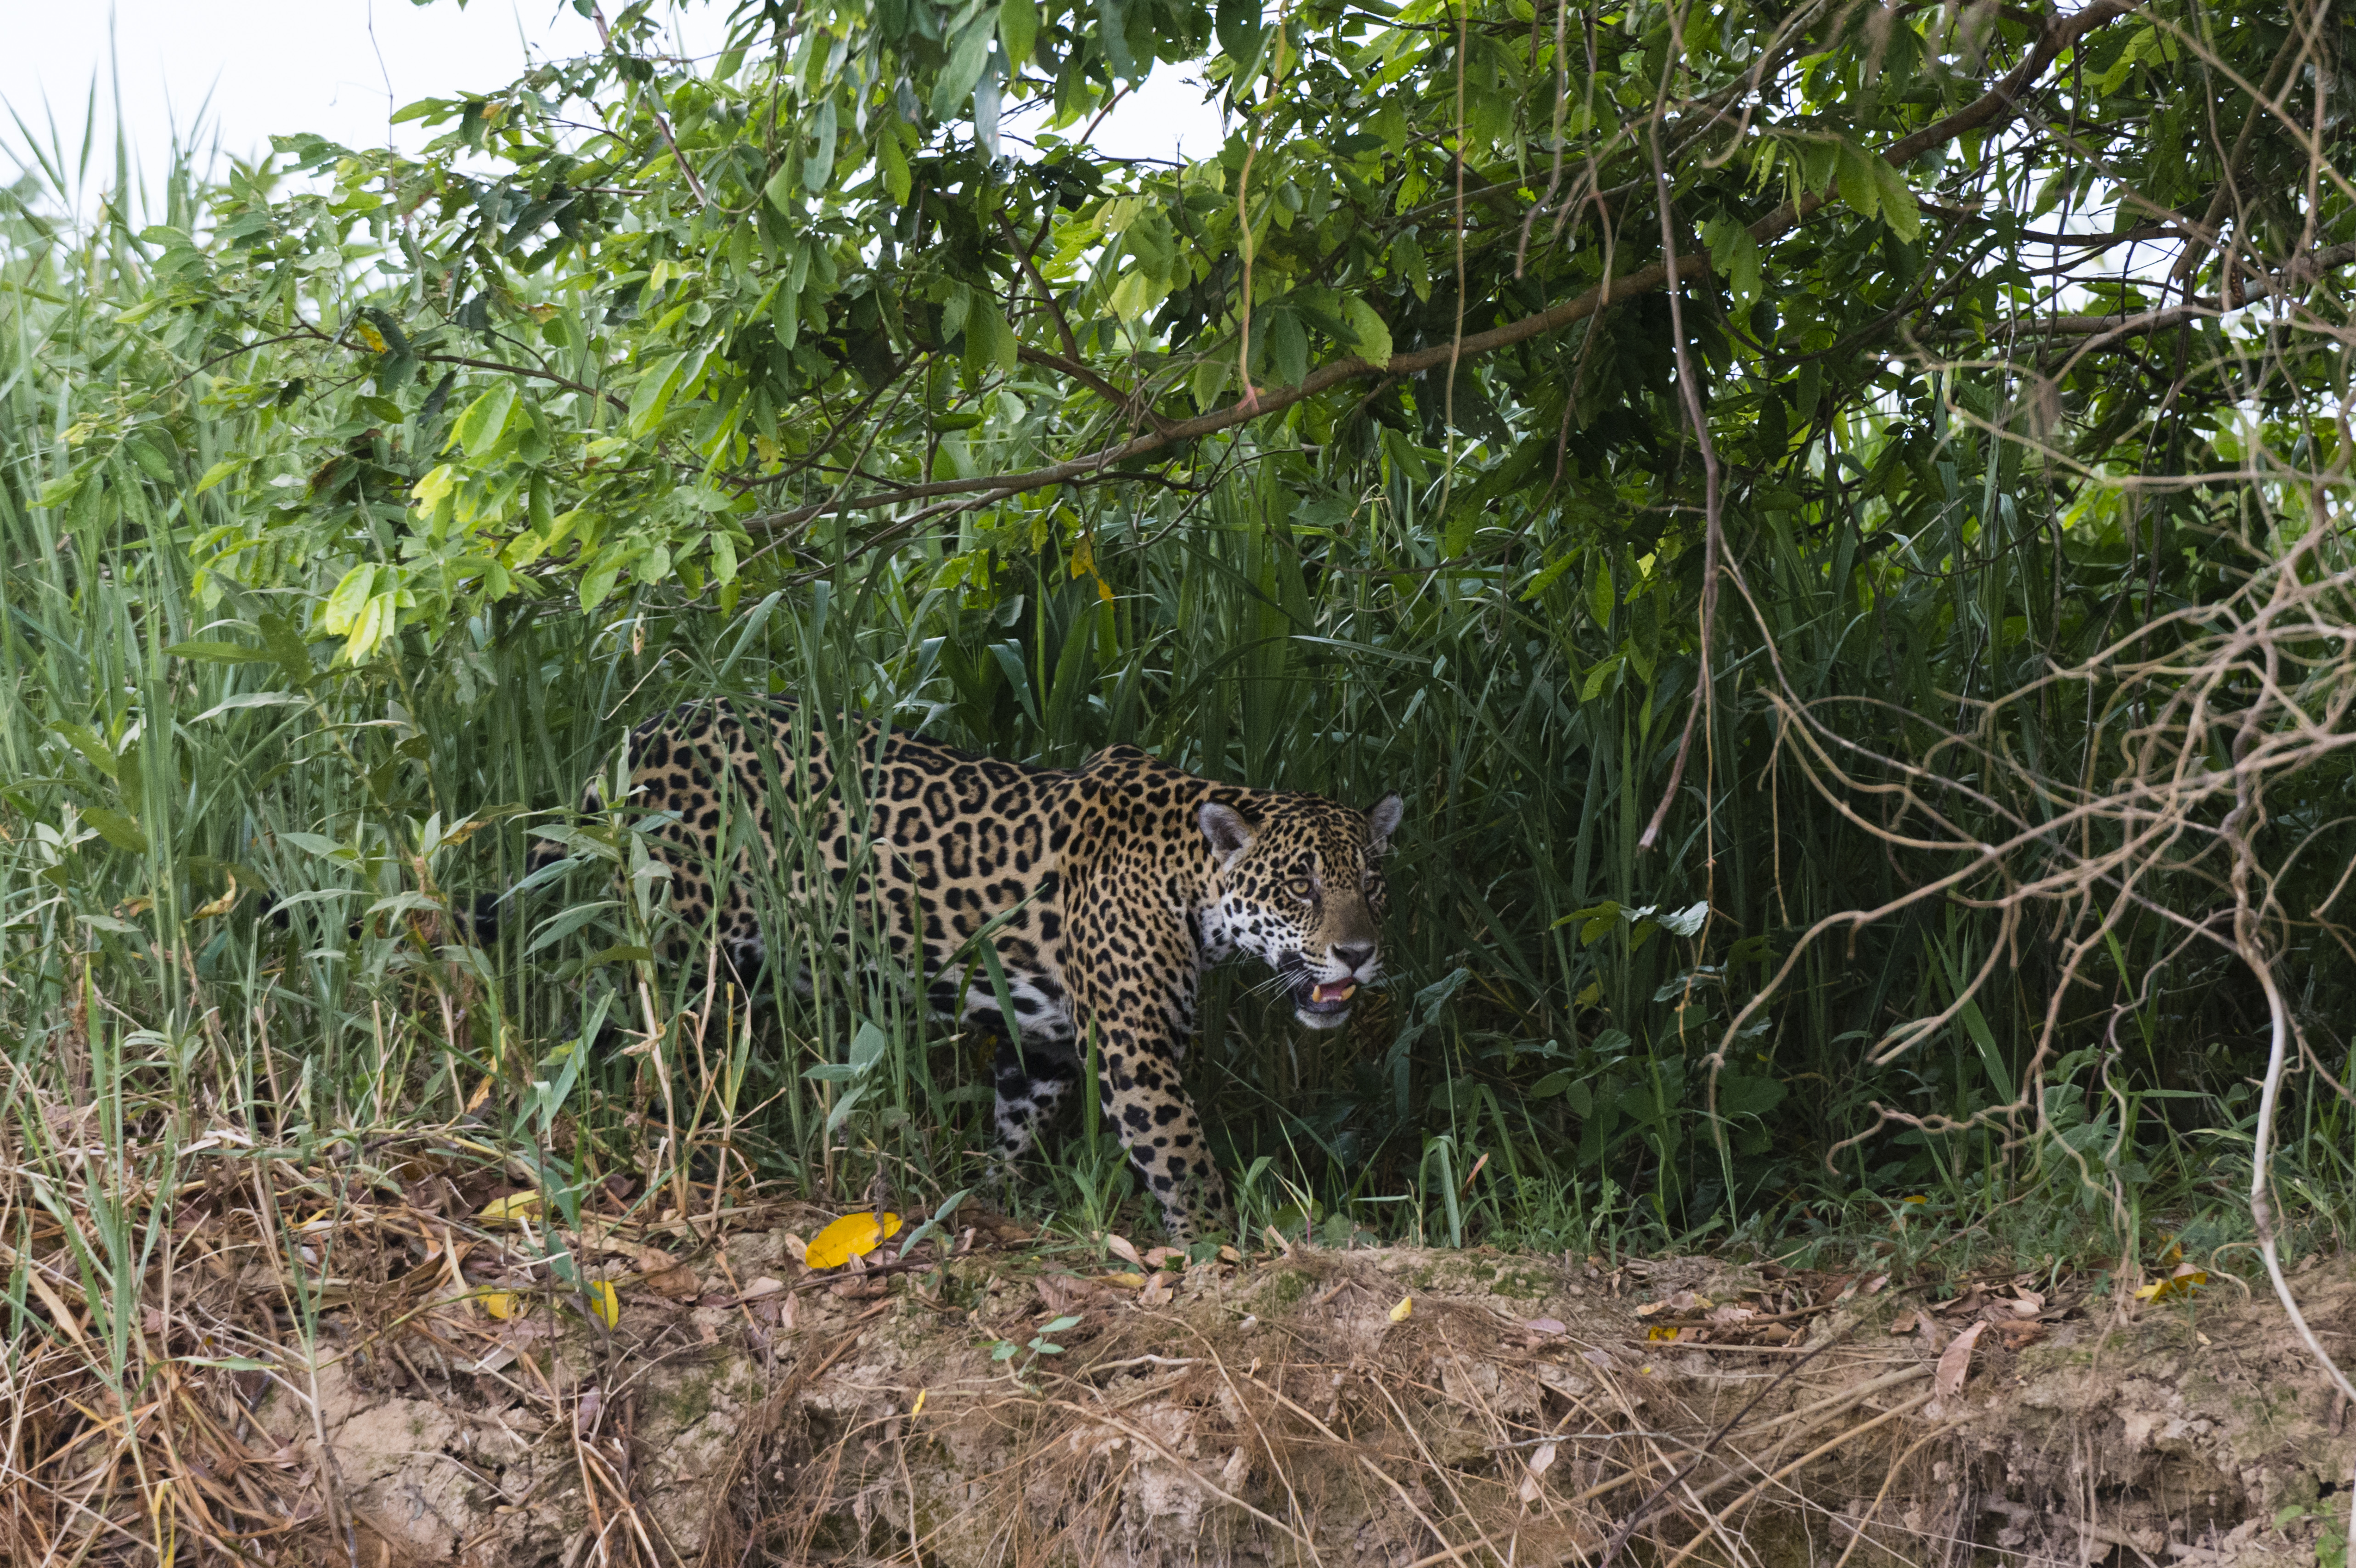 Jaguar prowling in the wetlands of Pantanal, Mato Grosso, Brazil. Image Credit: Envato Creative Commons.